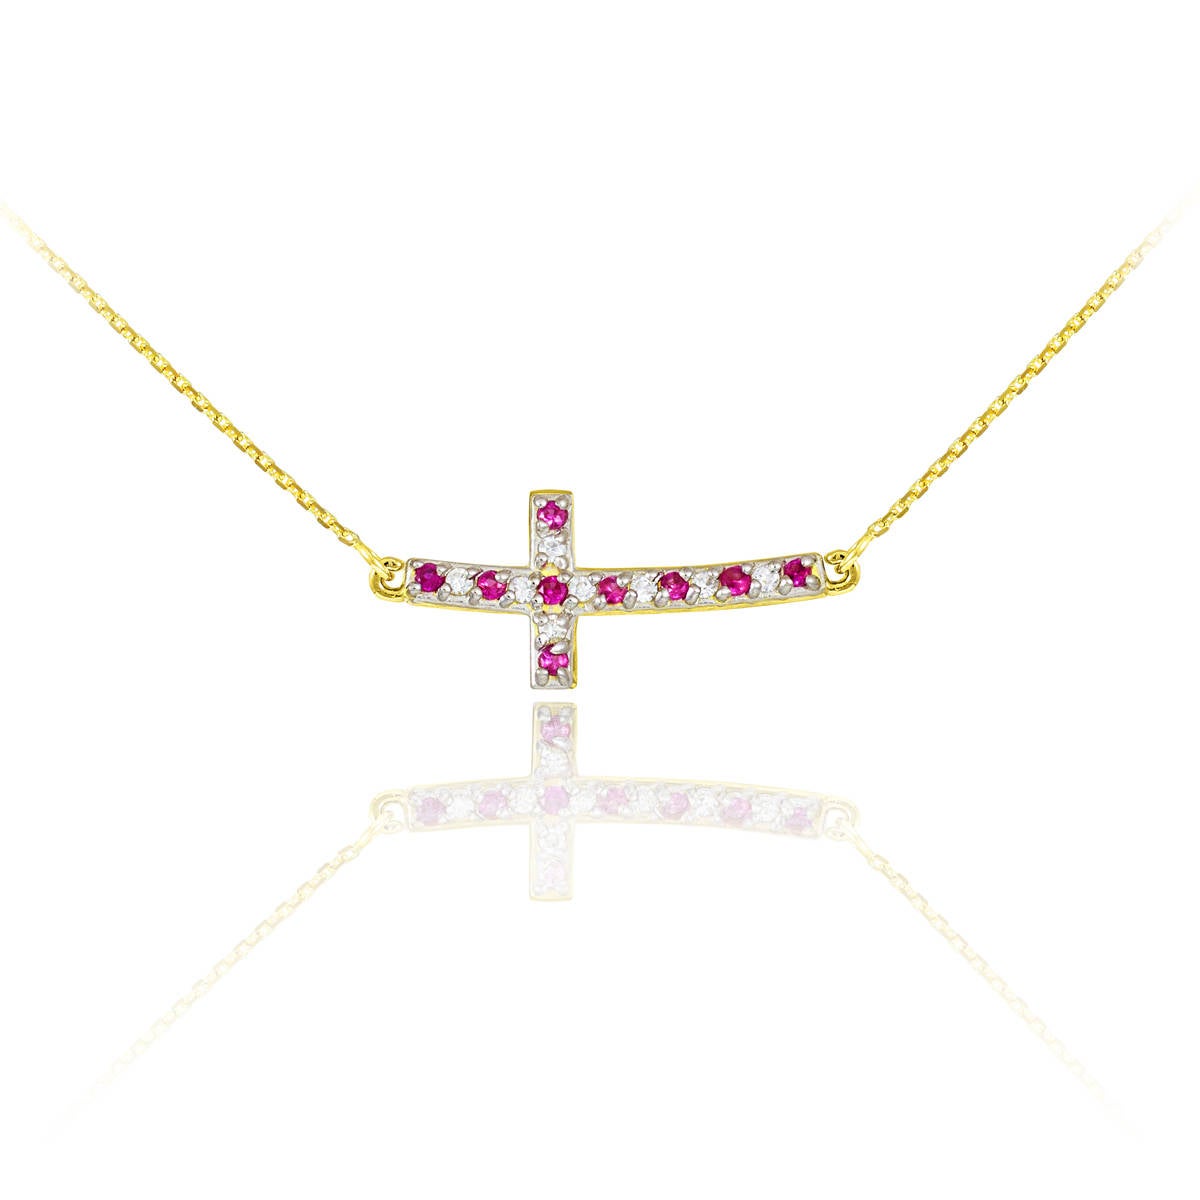 14K Gold Diamond and Ruby Curved Mini Sideways Cross Necklace (yellow, white, rose gold) Karma Blingz